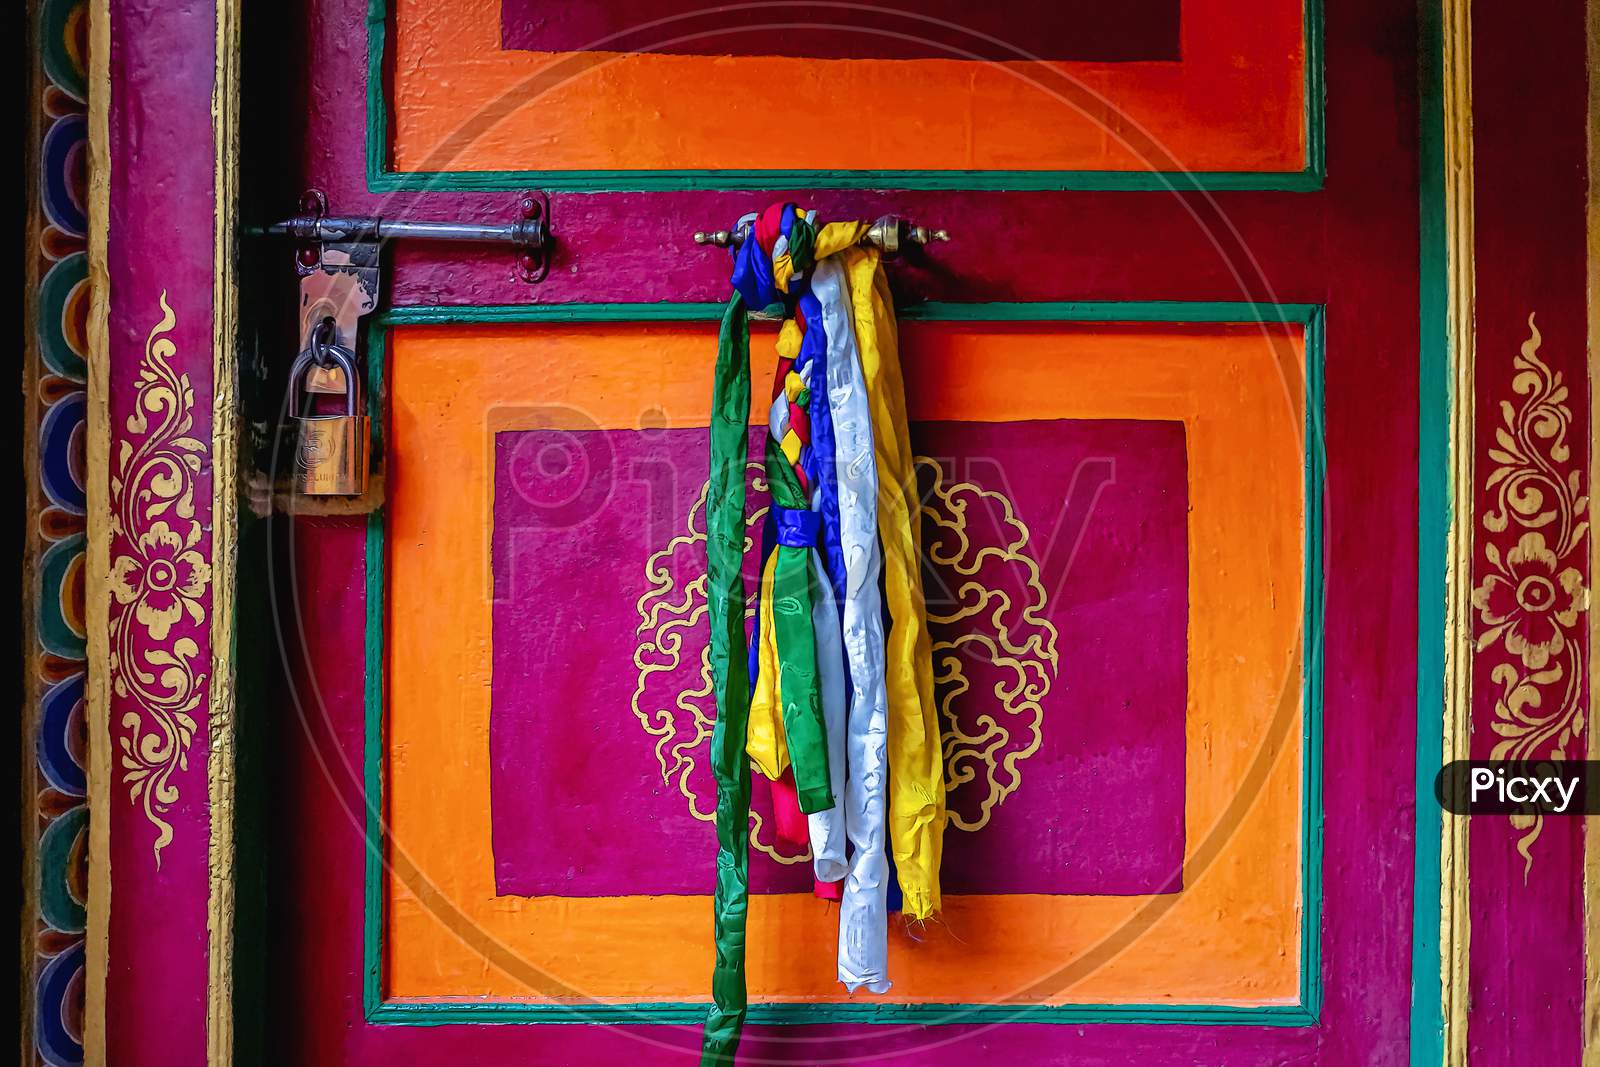 Beautiful colourful doorways with brightly coloured prayer flags decorate the doors of Thiksey Monastery in Ladakh, India